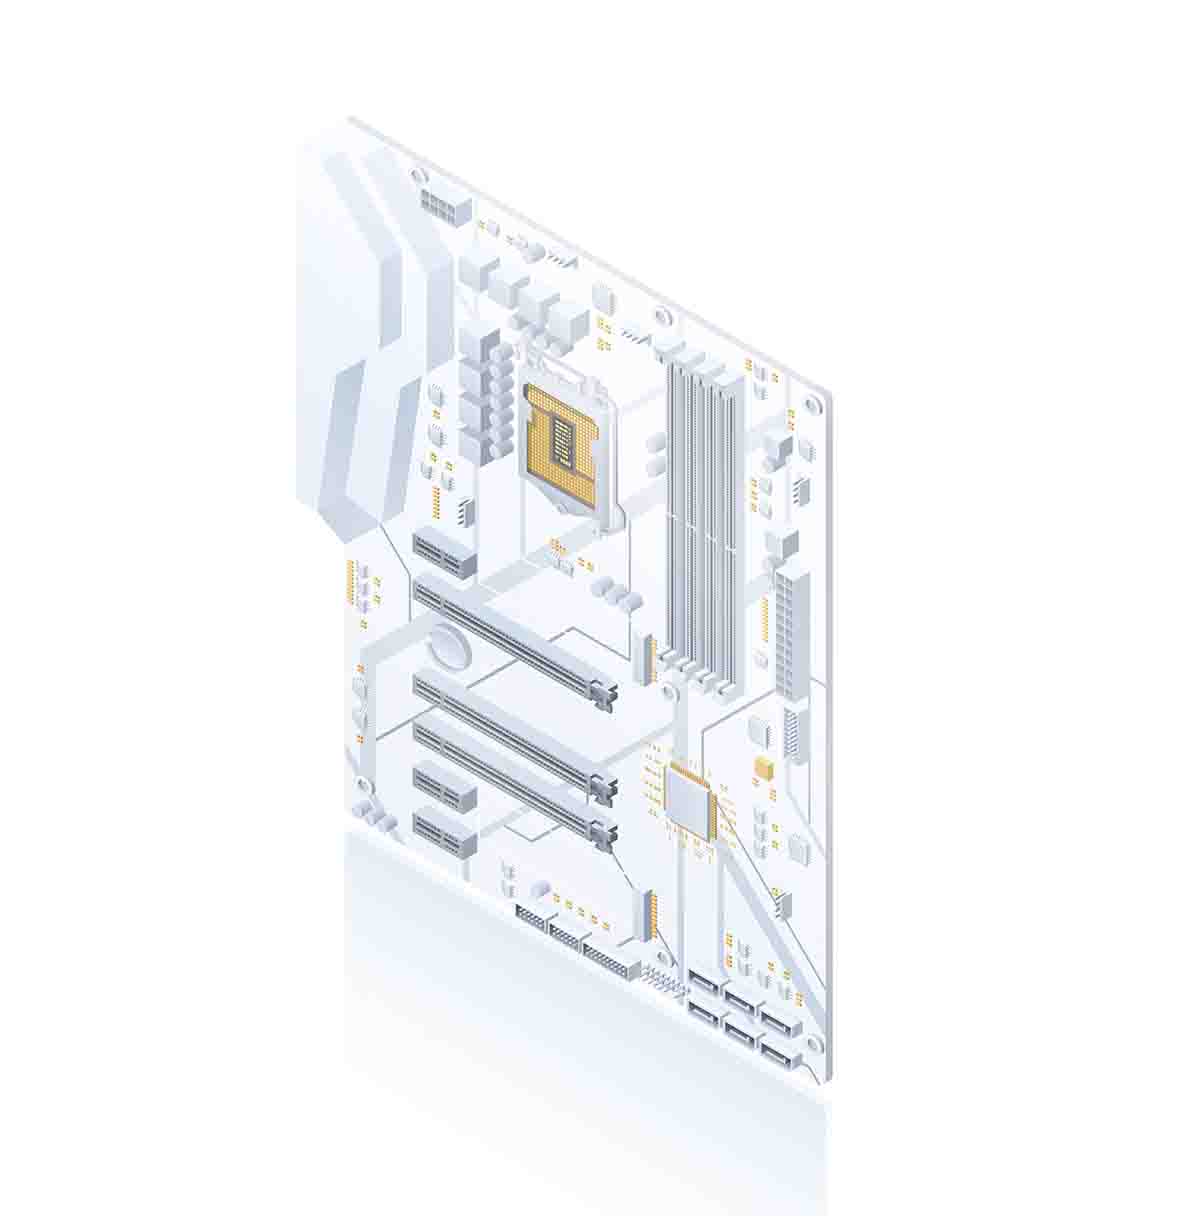 Minimalist isometric illustration of a white motherboard with slots and connectors, emphasizing modern design.